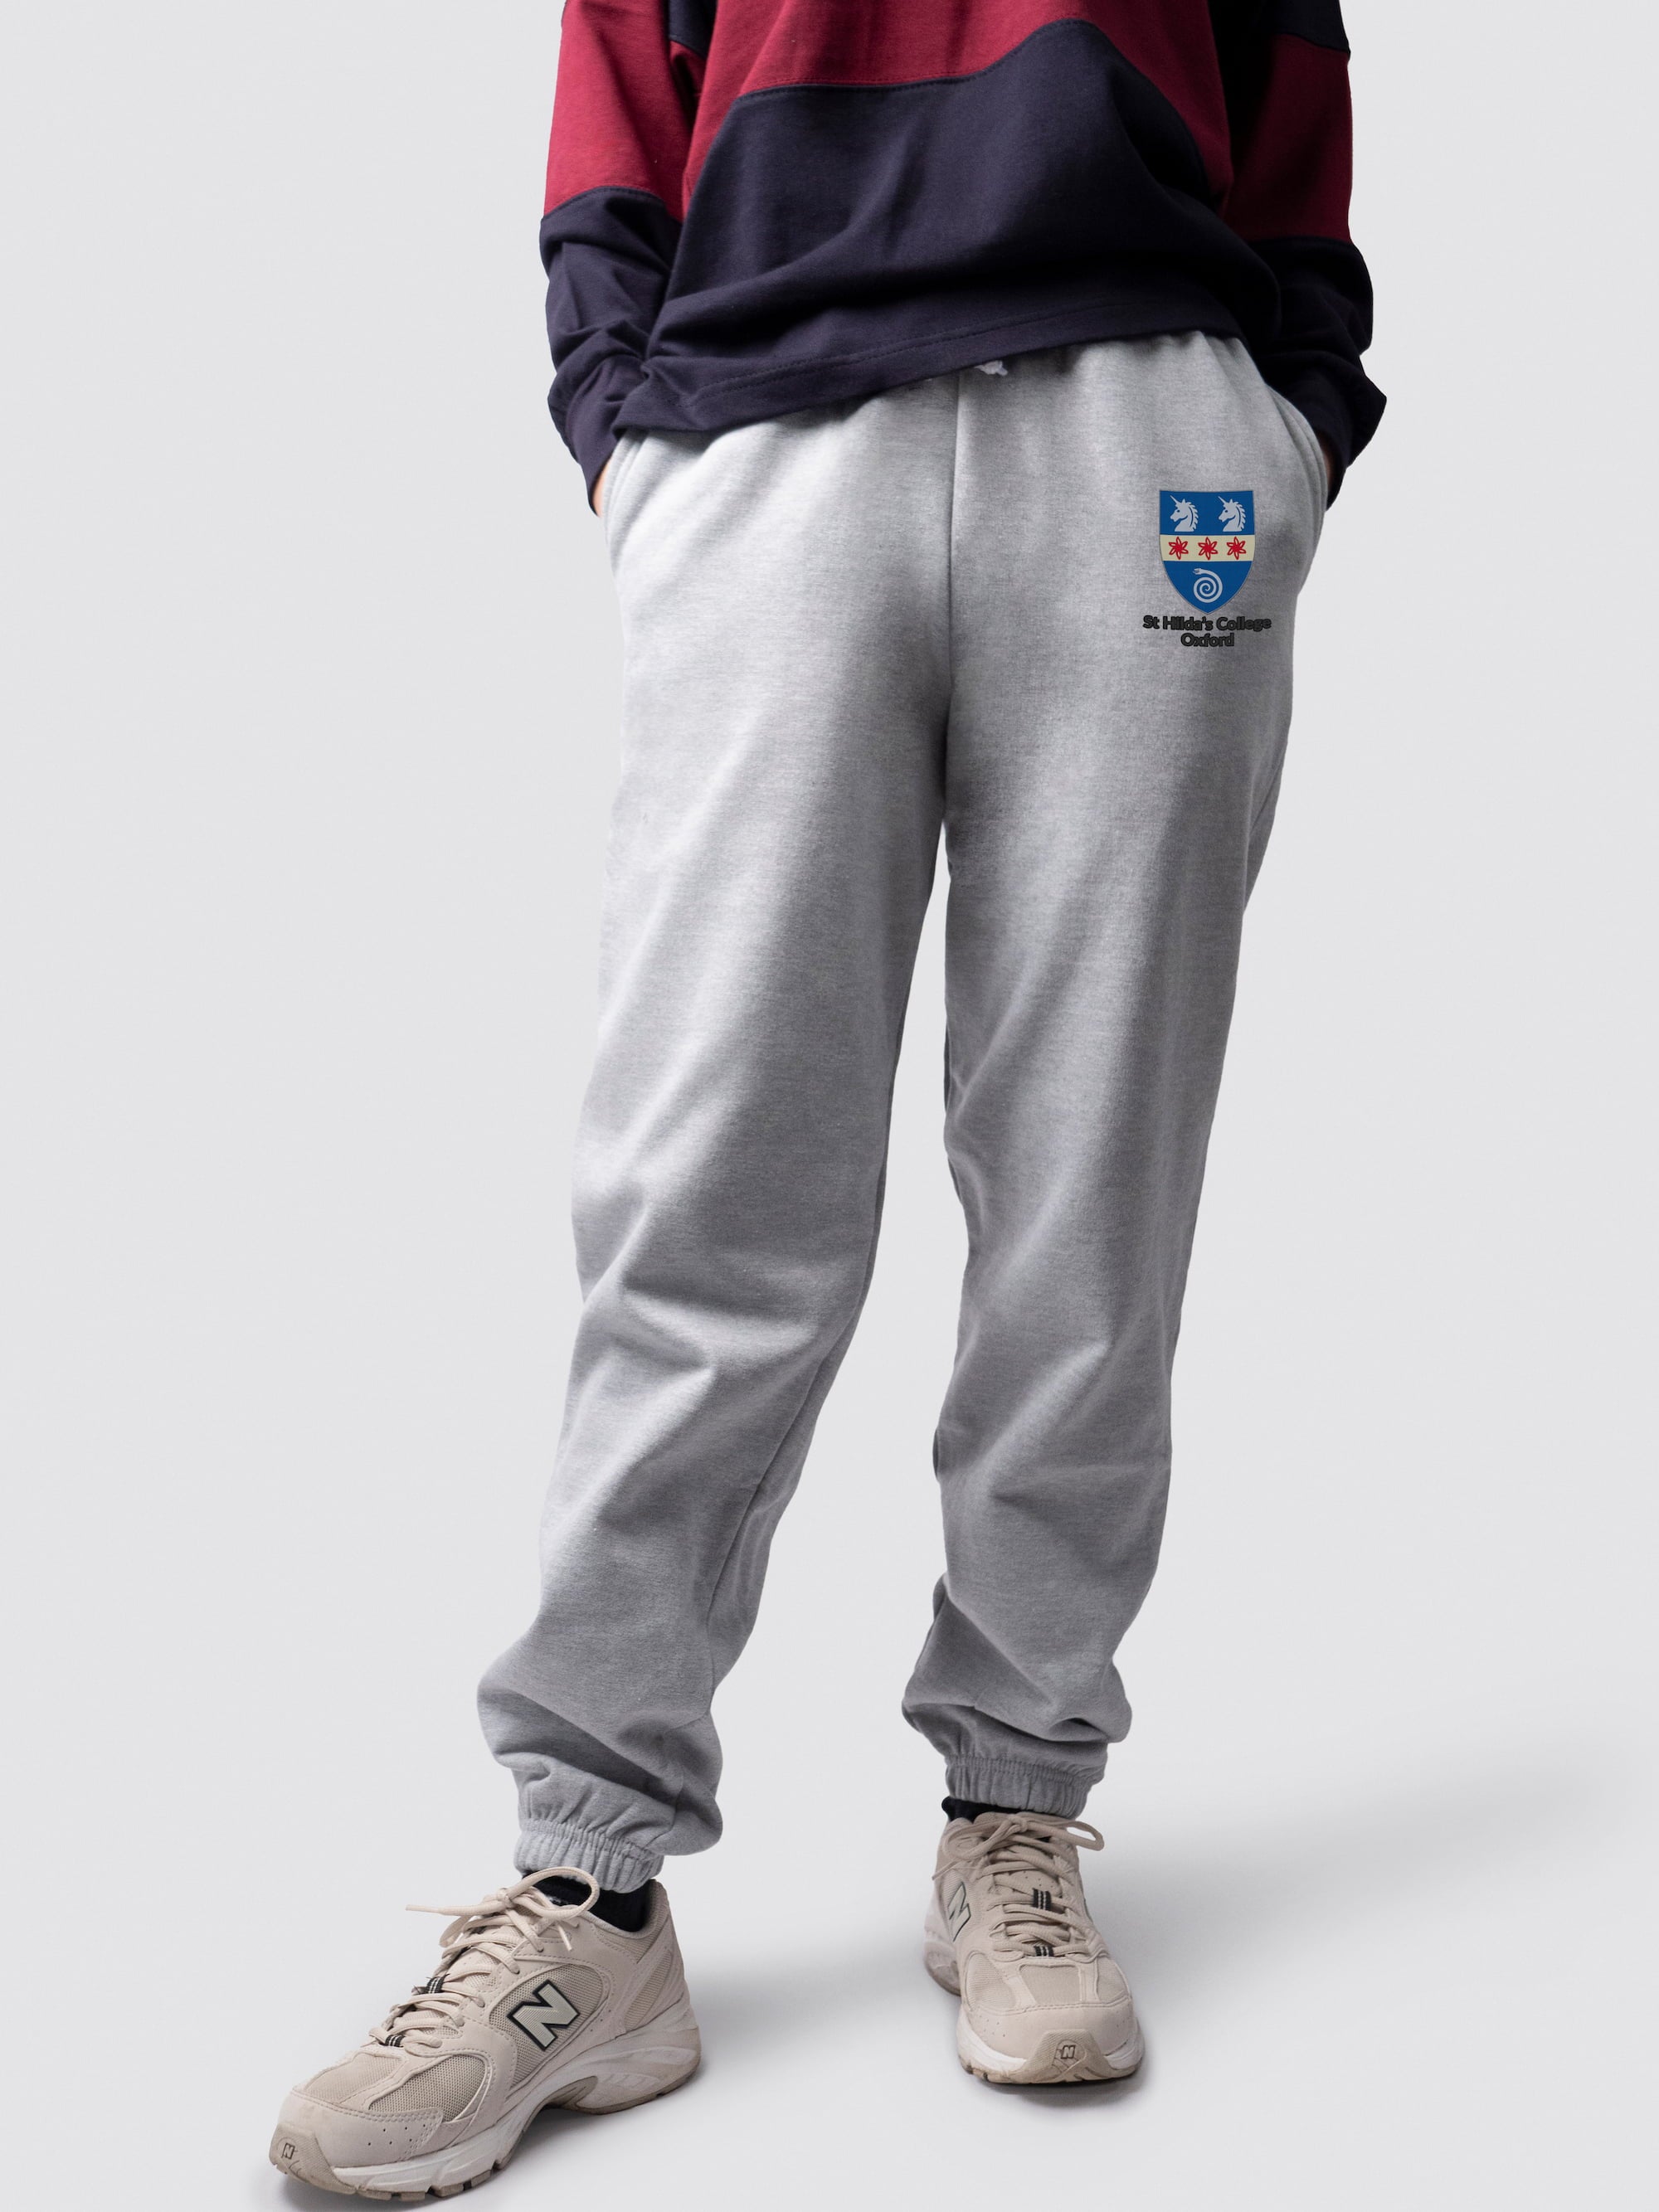 undergraduate cuffed sweatpants, made from soft cotton fabric, with St Hilda's College logo